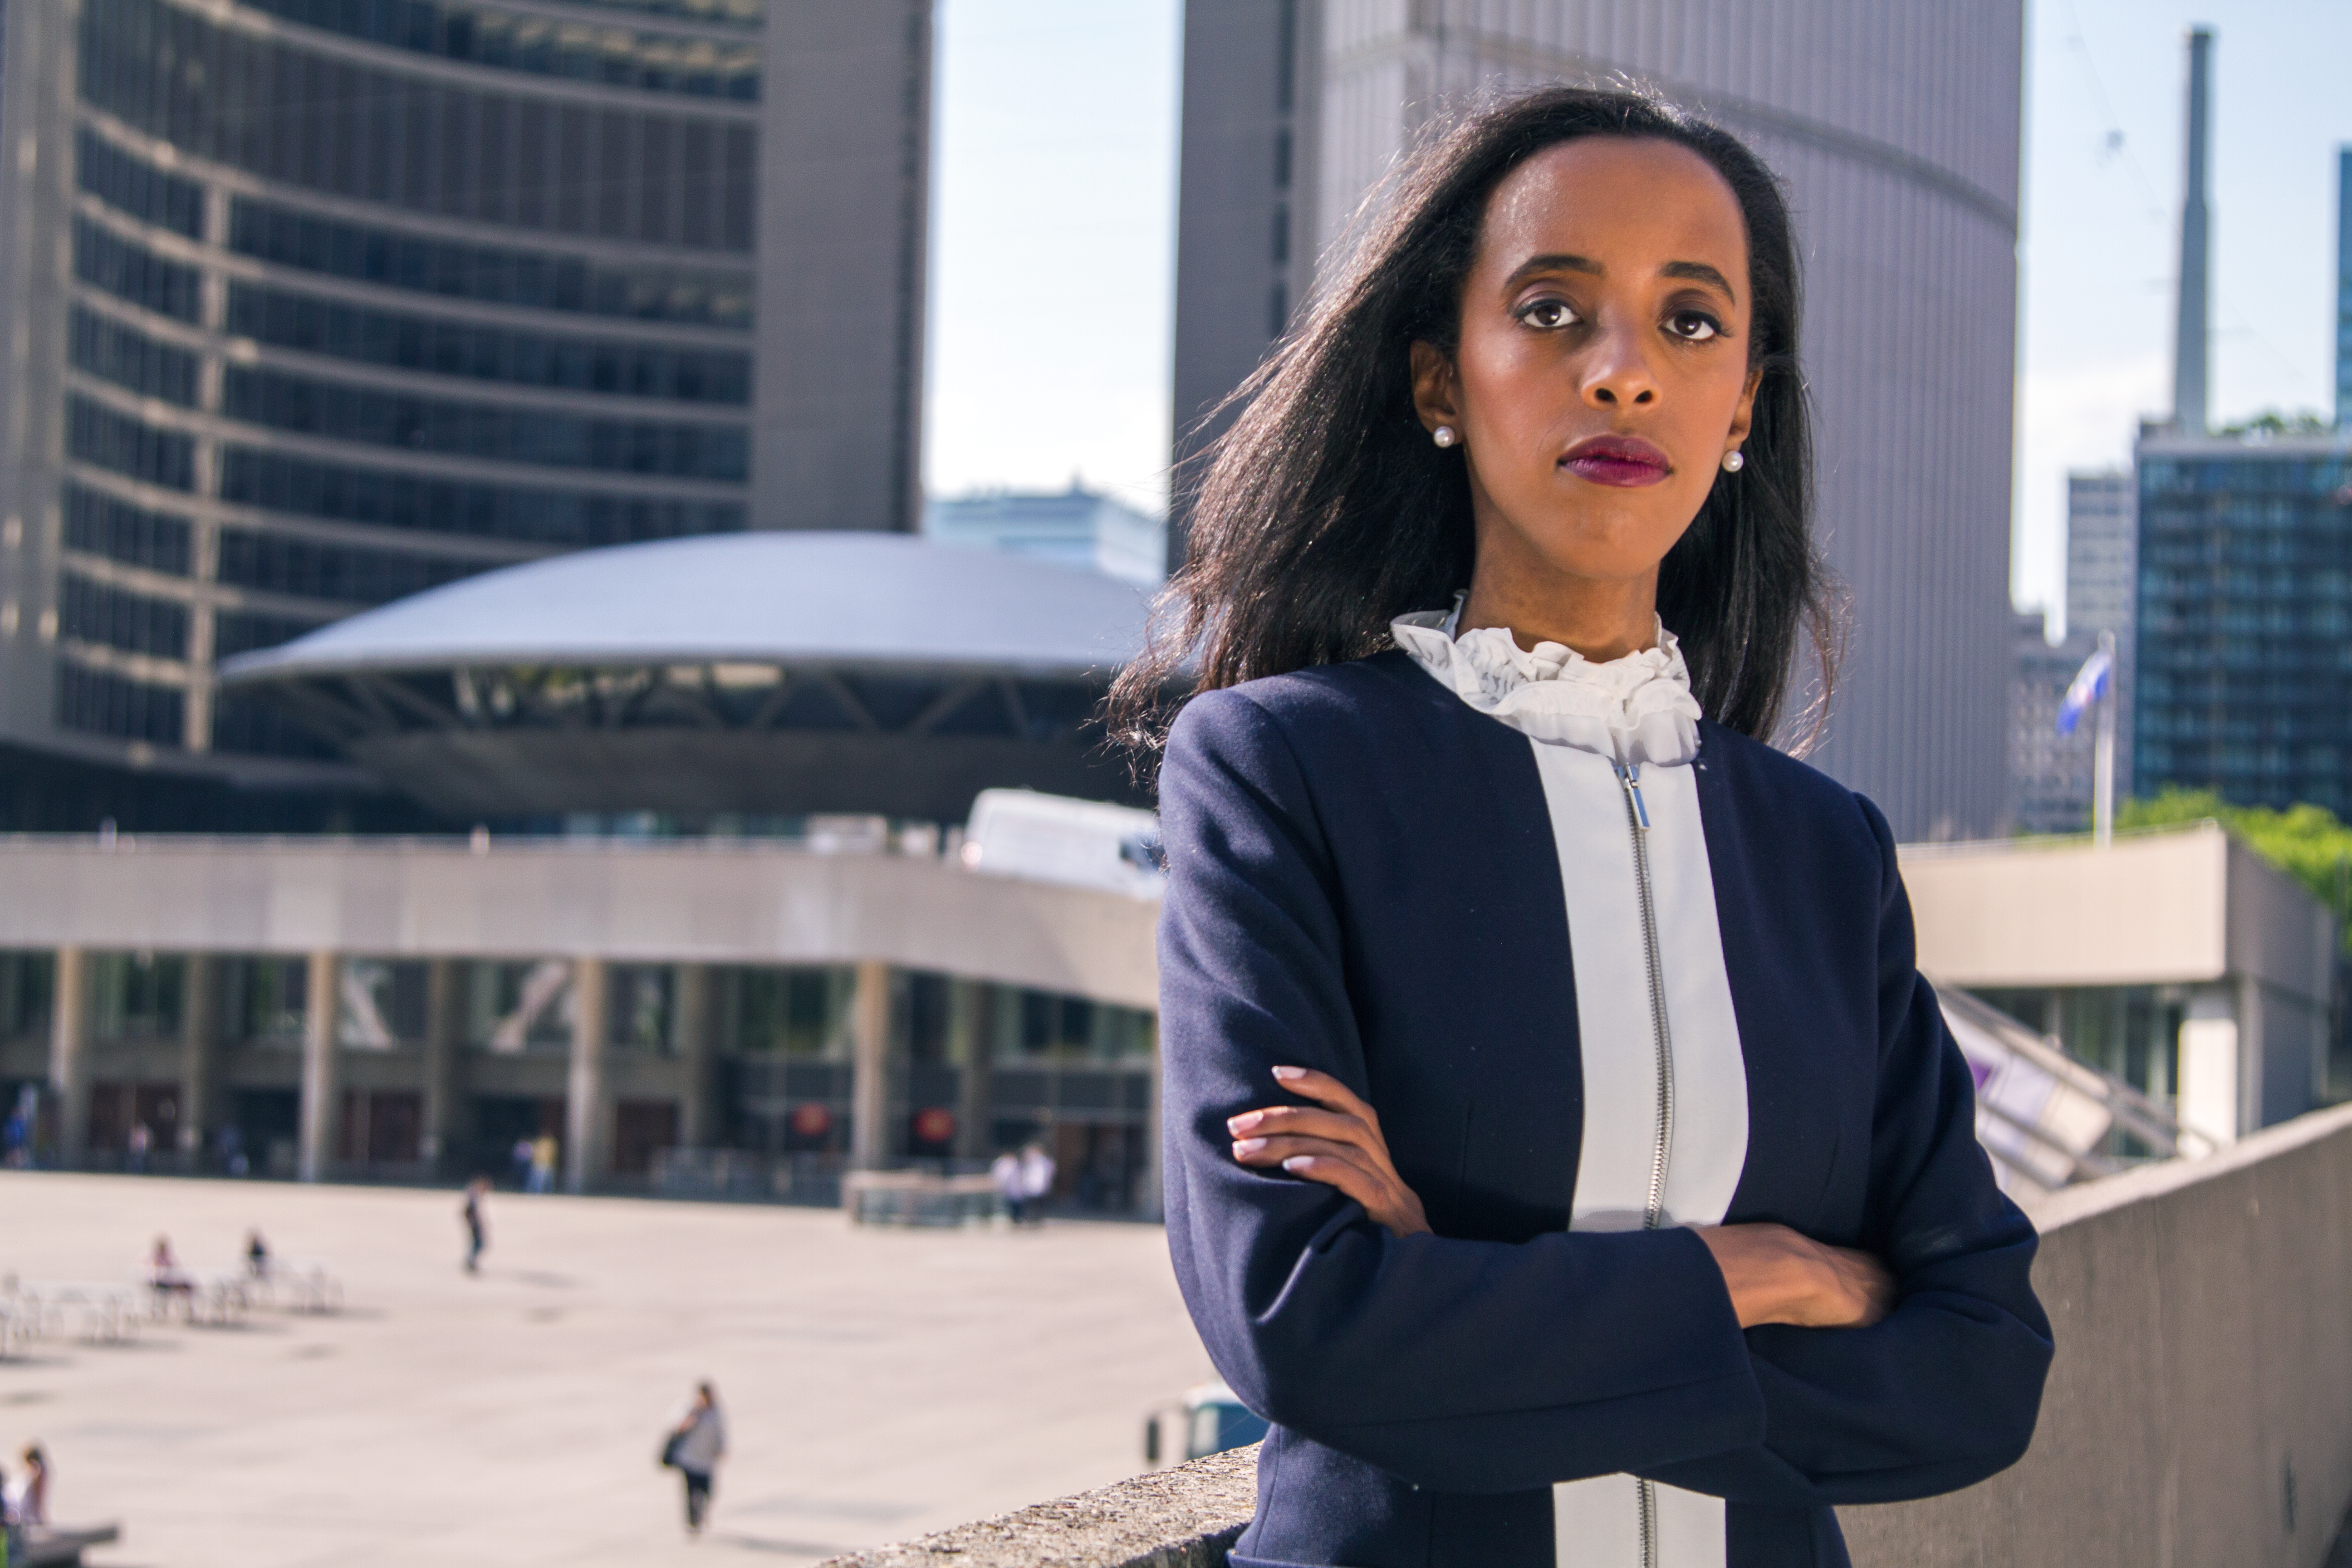 Saron Gebresellassi City of Toronto 2018 mayoral candidate stands in front of City Hall with her arms crossed whilie looking with serious expression into camera. The background of the City Hall building is slightly blurred with some citizens walking about.